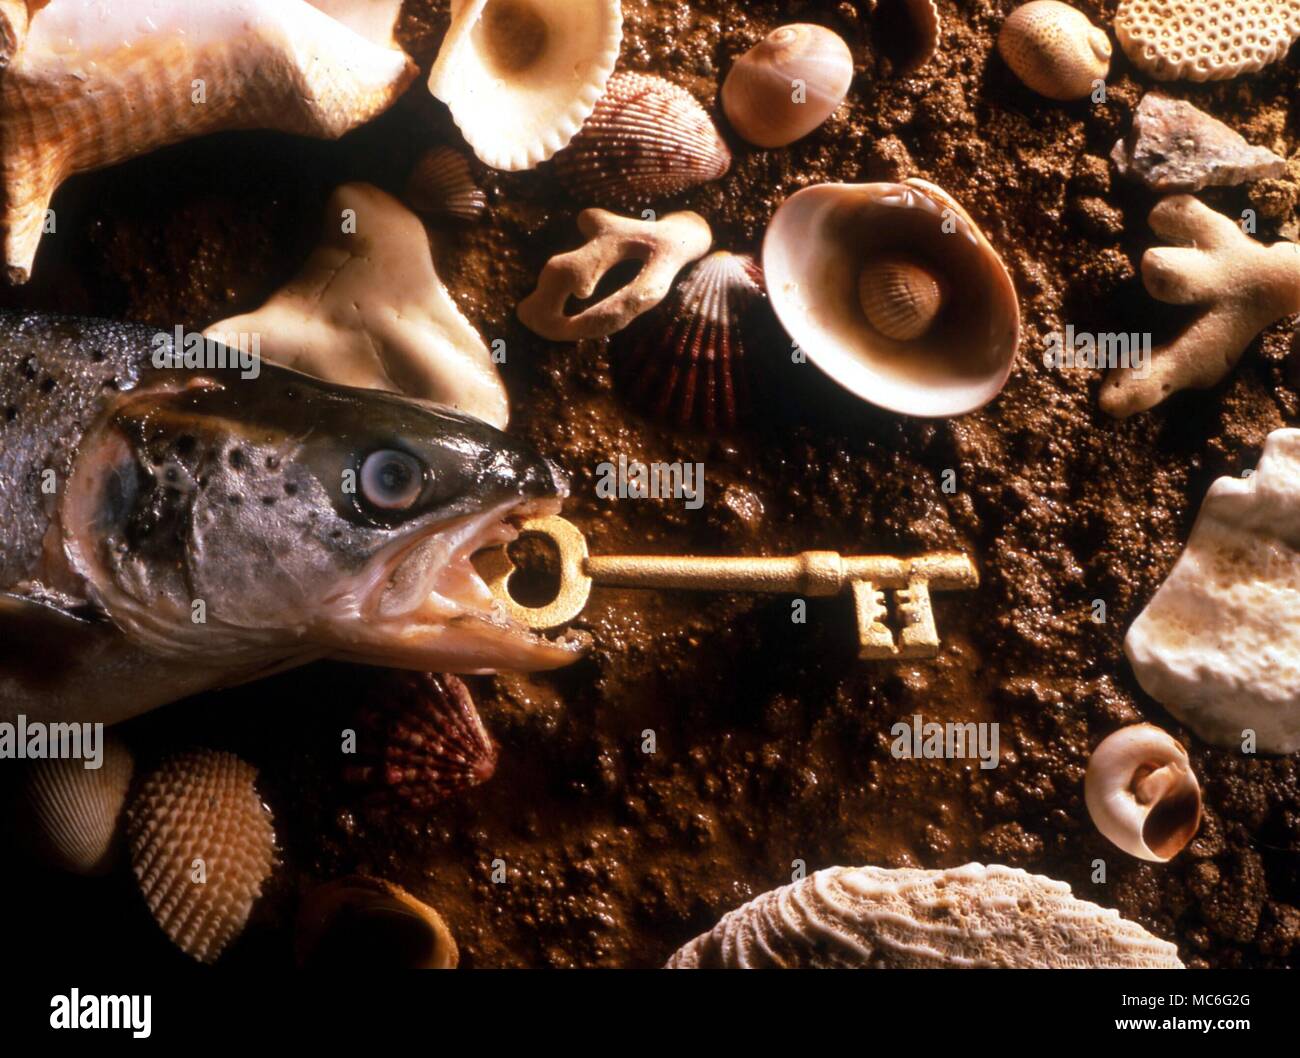 Fish (salmon) with golden key projecting from mouth - illustration to popular fairy tale about a magical fish. Stock Photo